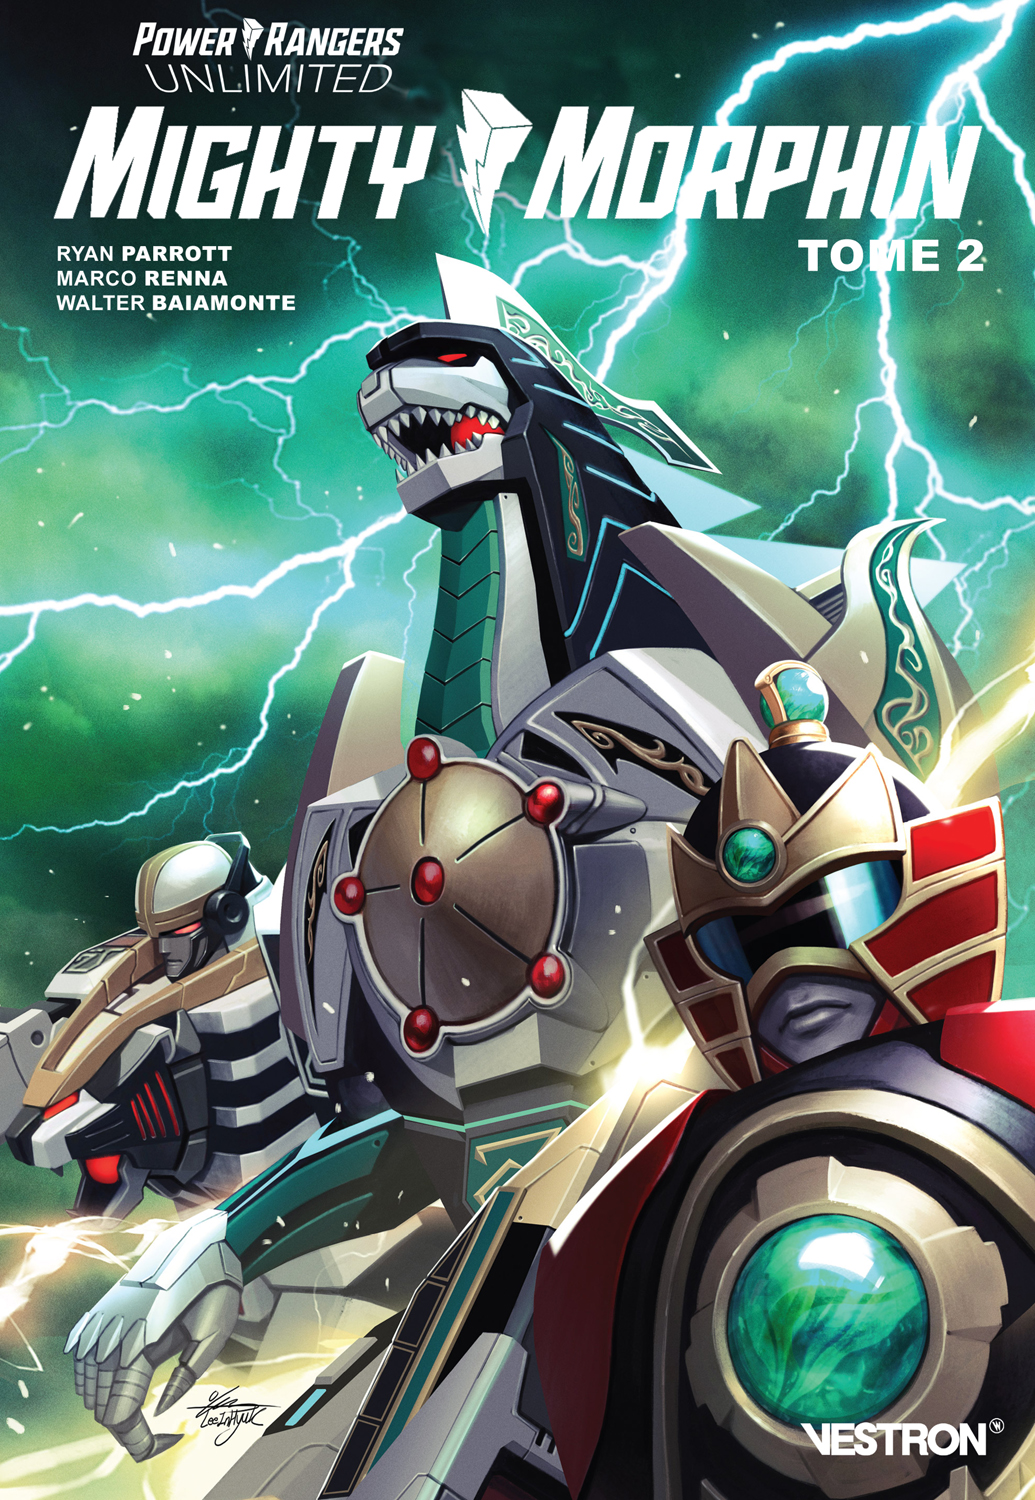 Power Rangers Unlimited - Mighty Morphin Tome 2